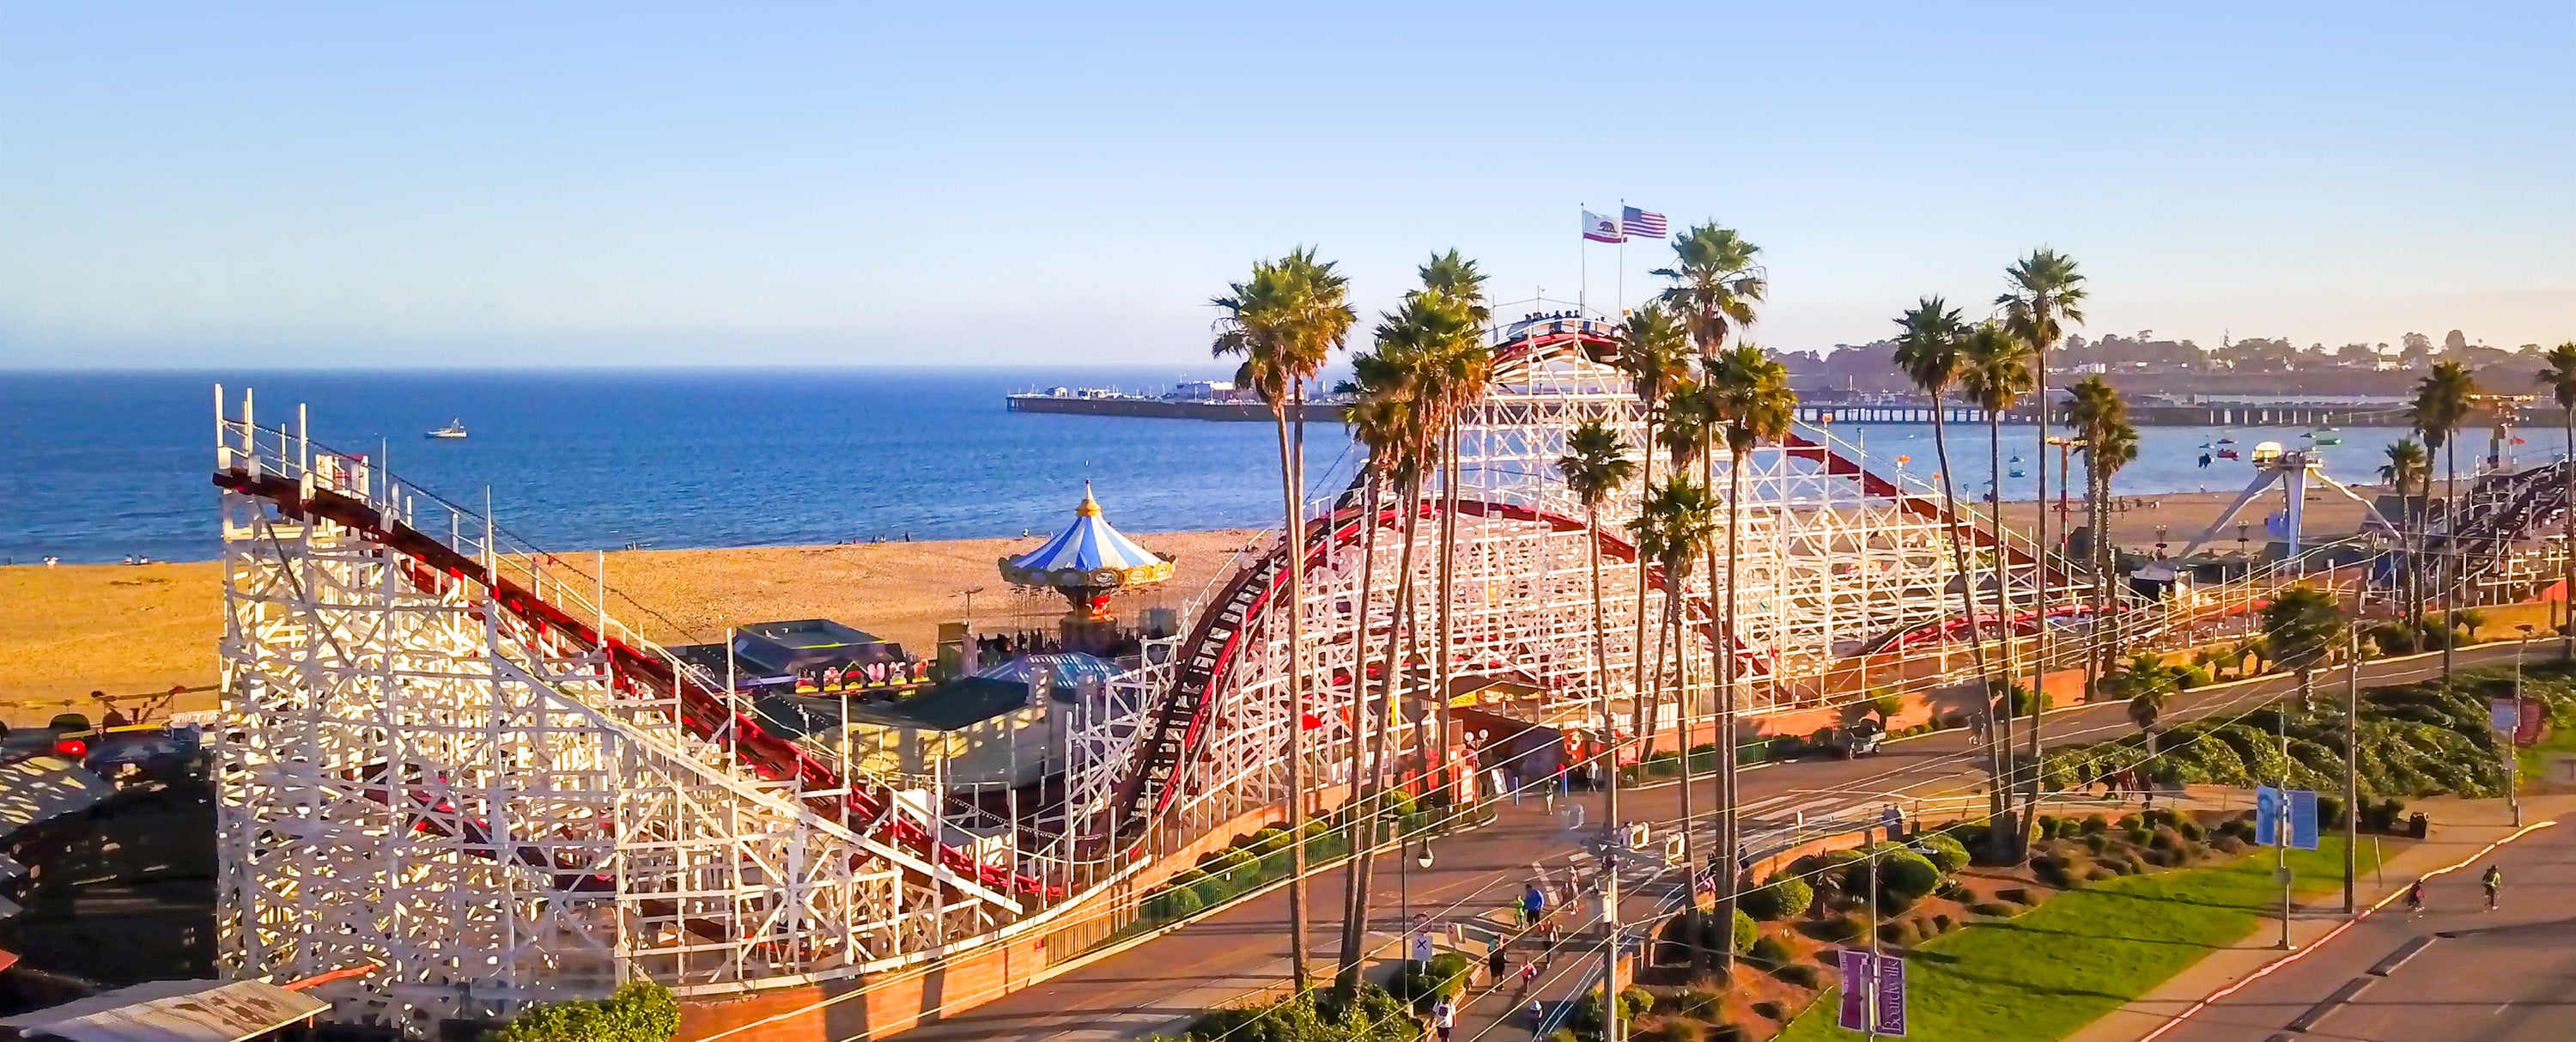 Historic GIant Dipper roller coaster with ocean view